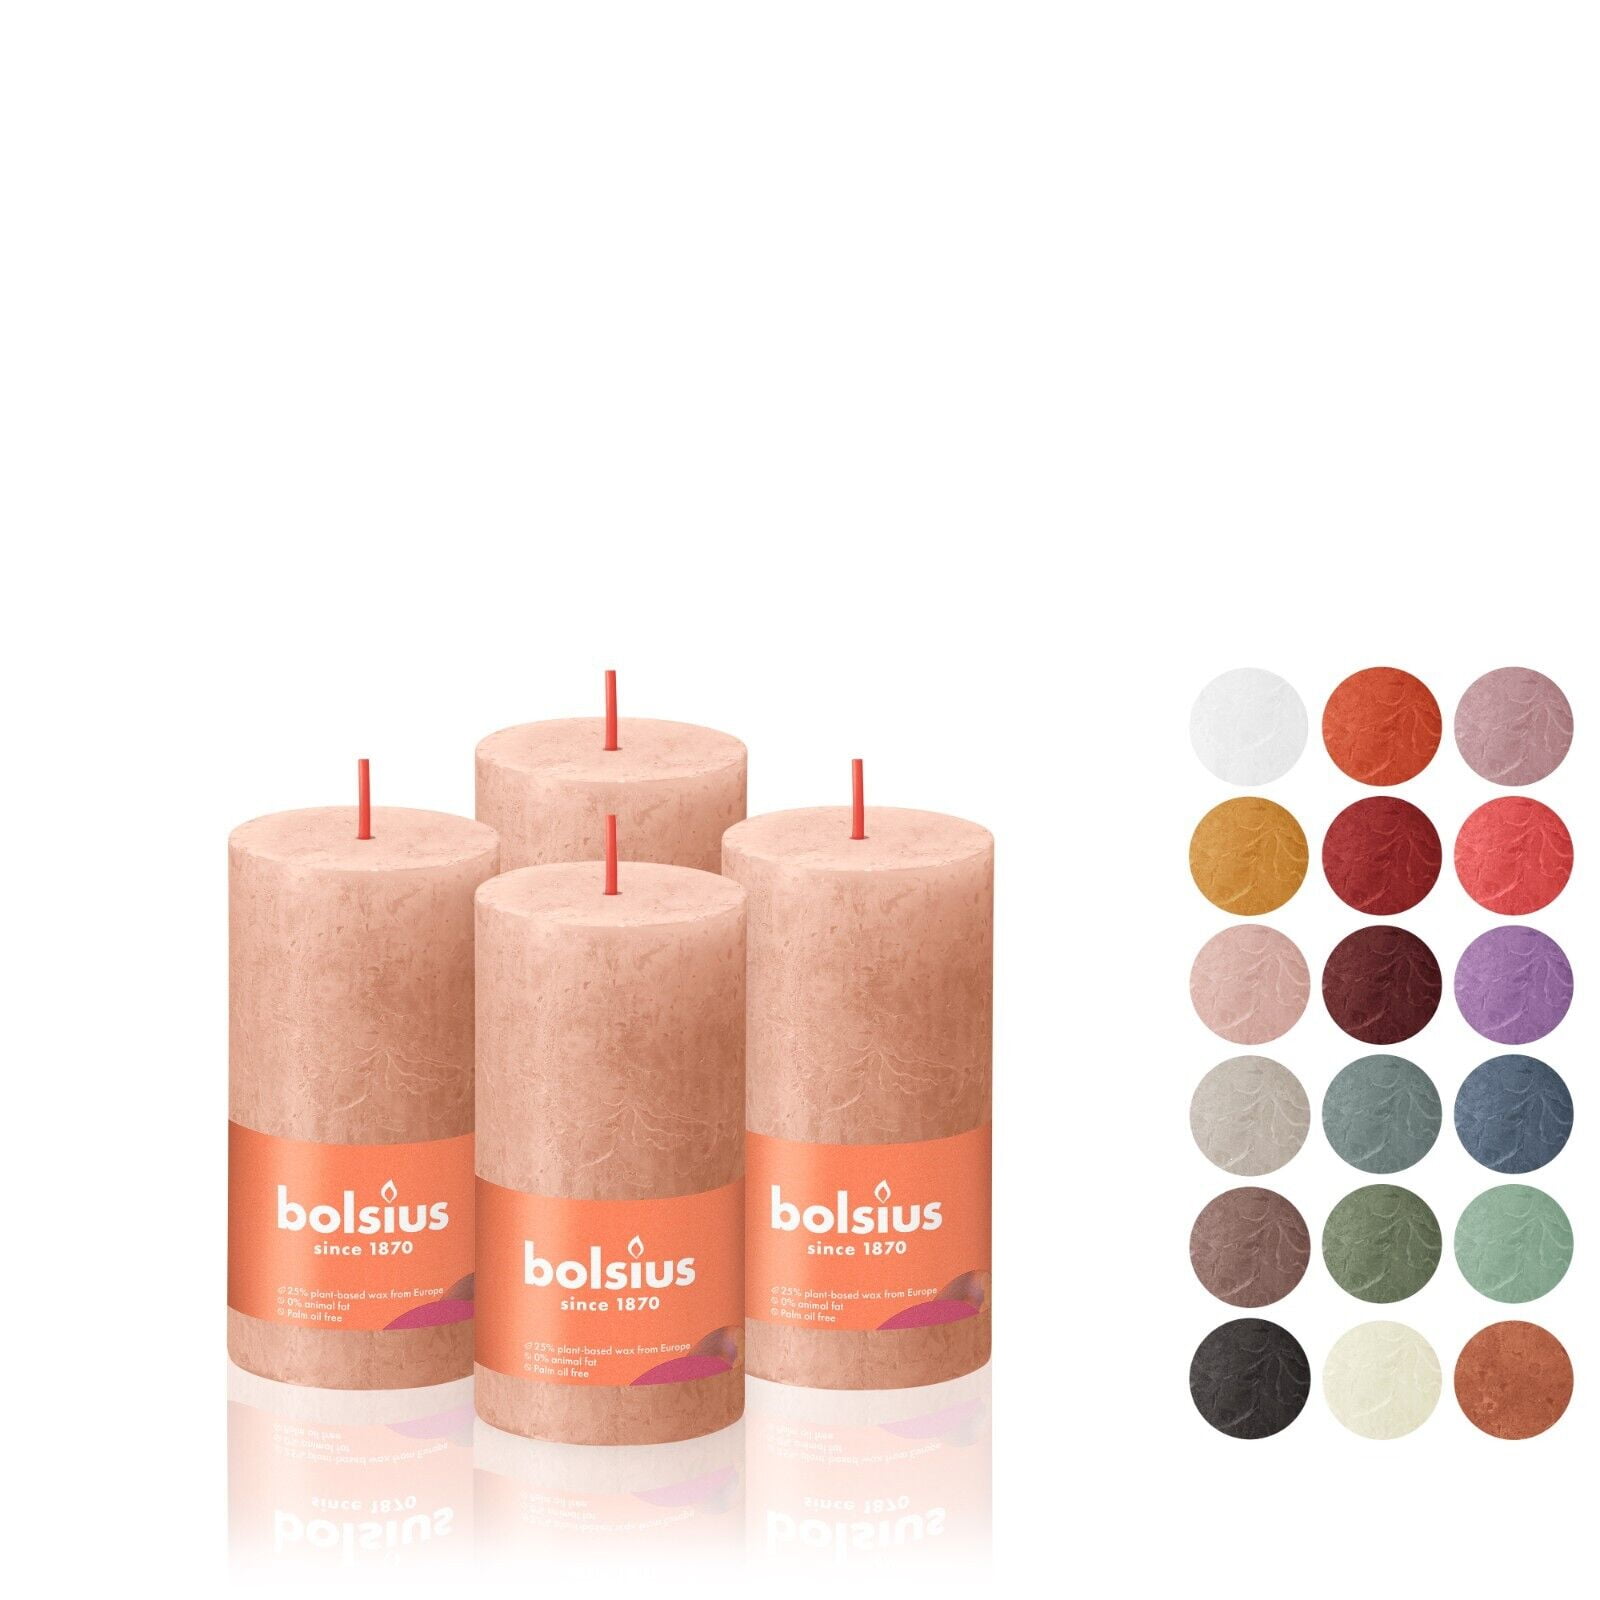 BOLSIUS 4 Pack Twilight Blue Rustic Pillar Candles - 2 X 4 Inches - Premium  European Quality - Natural Eco-Friendly Plant-Based Wax - Unscented  Dripless Smokeless 30 Hour 